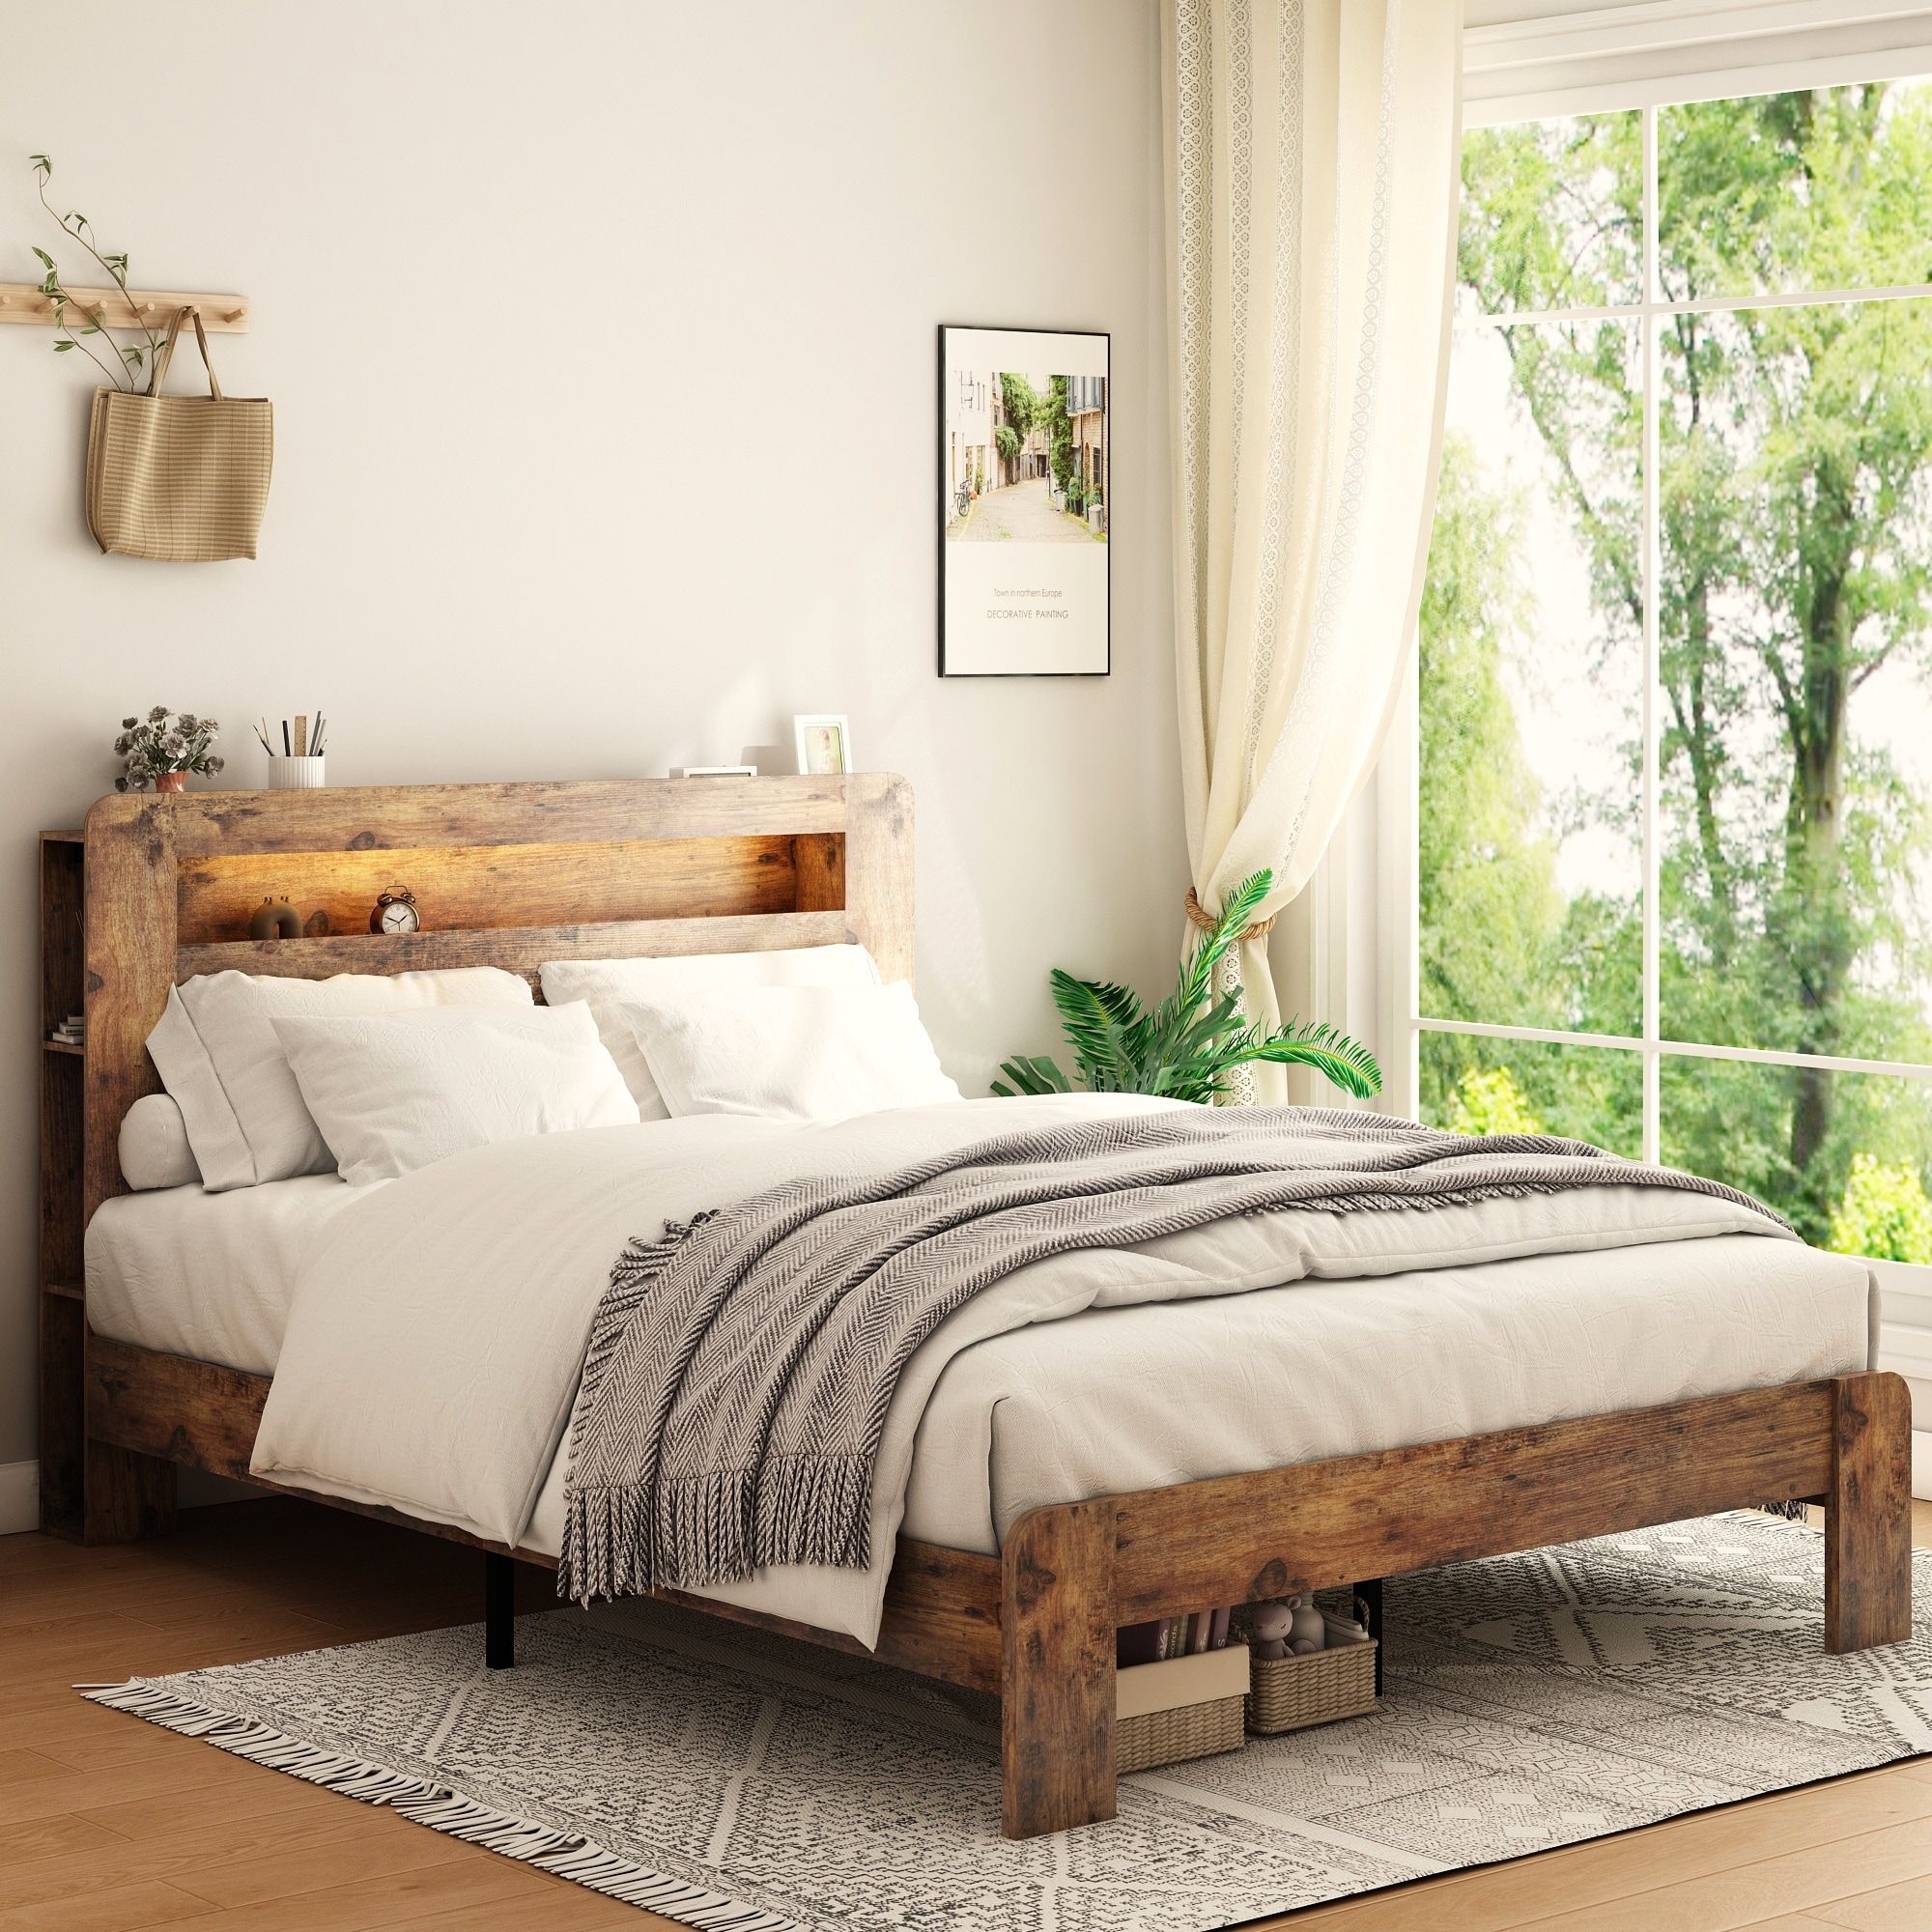 The Beauty and Elegance of a King Size Wooden Bed Frame